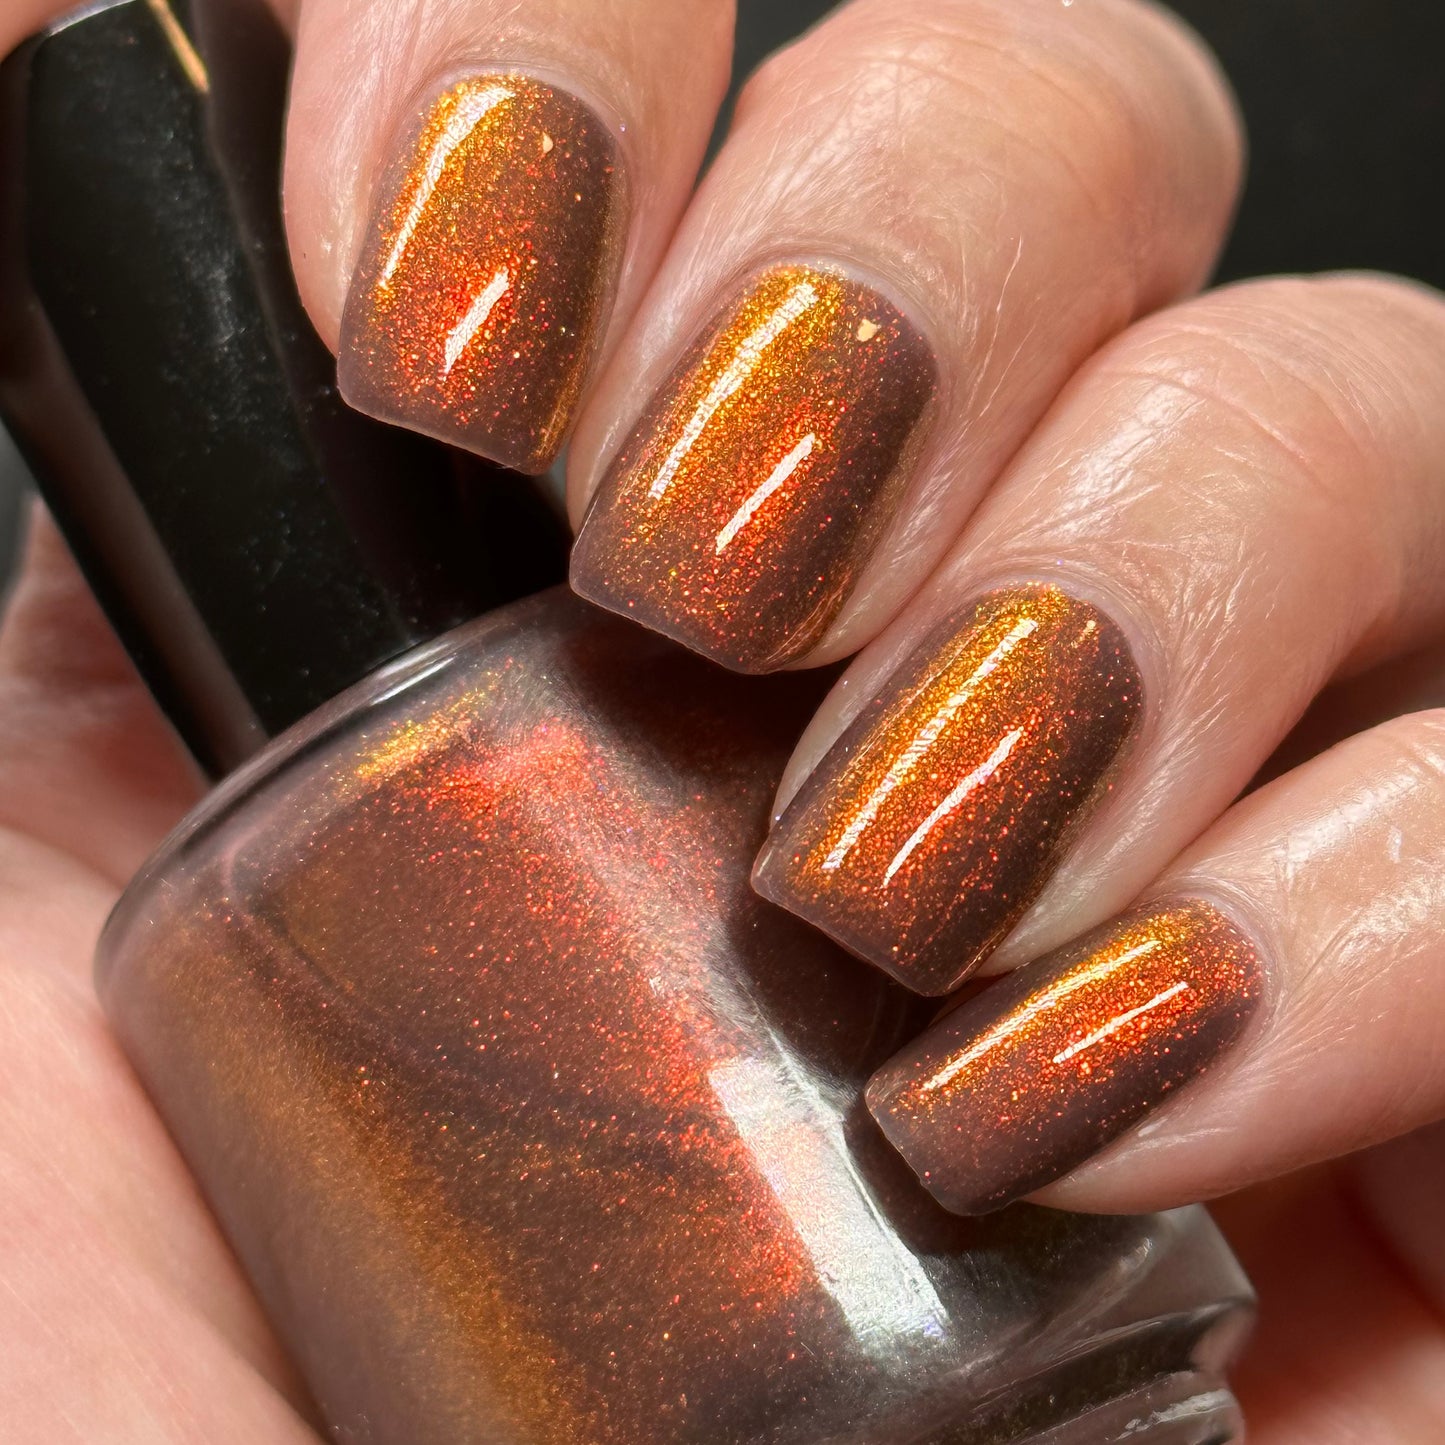 Dingle Berries - Brown Shimmer Nail Polish - Dec 2022 Polish of the Month